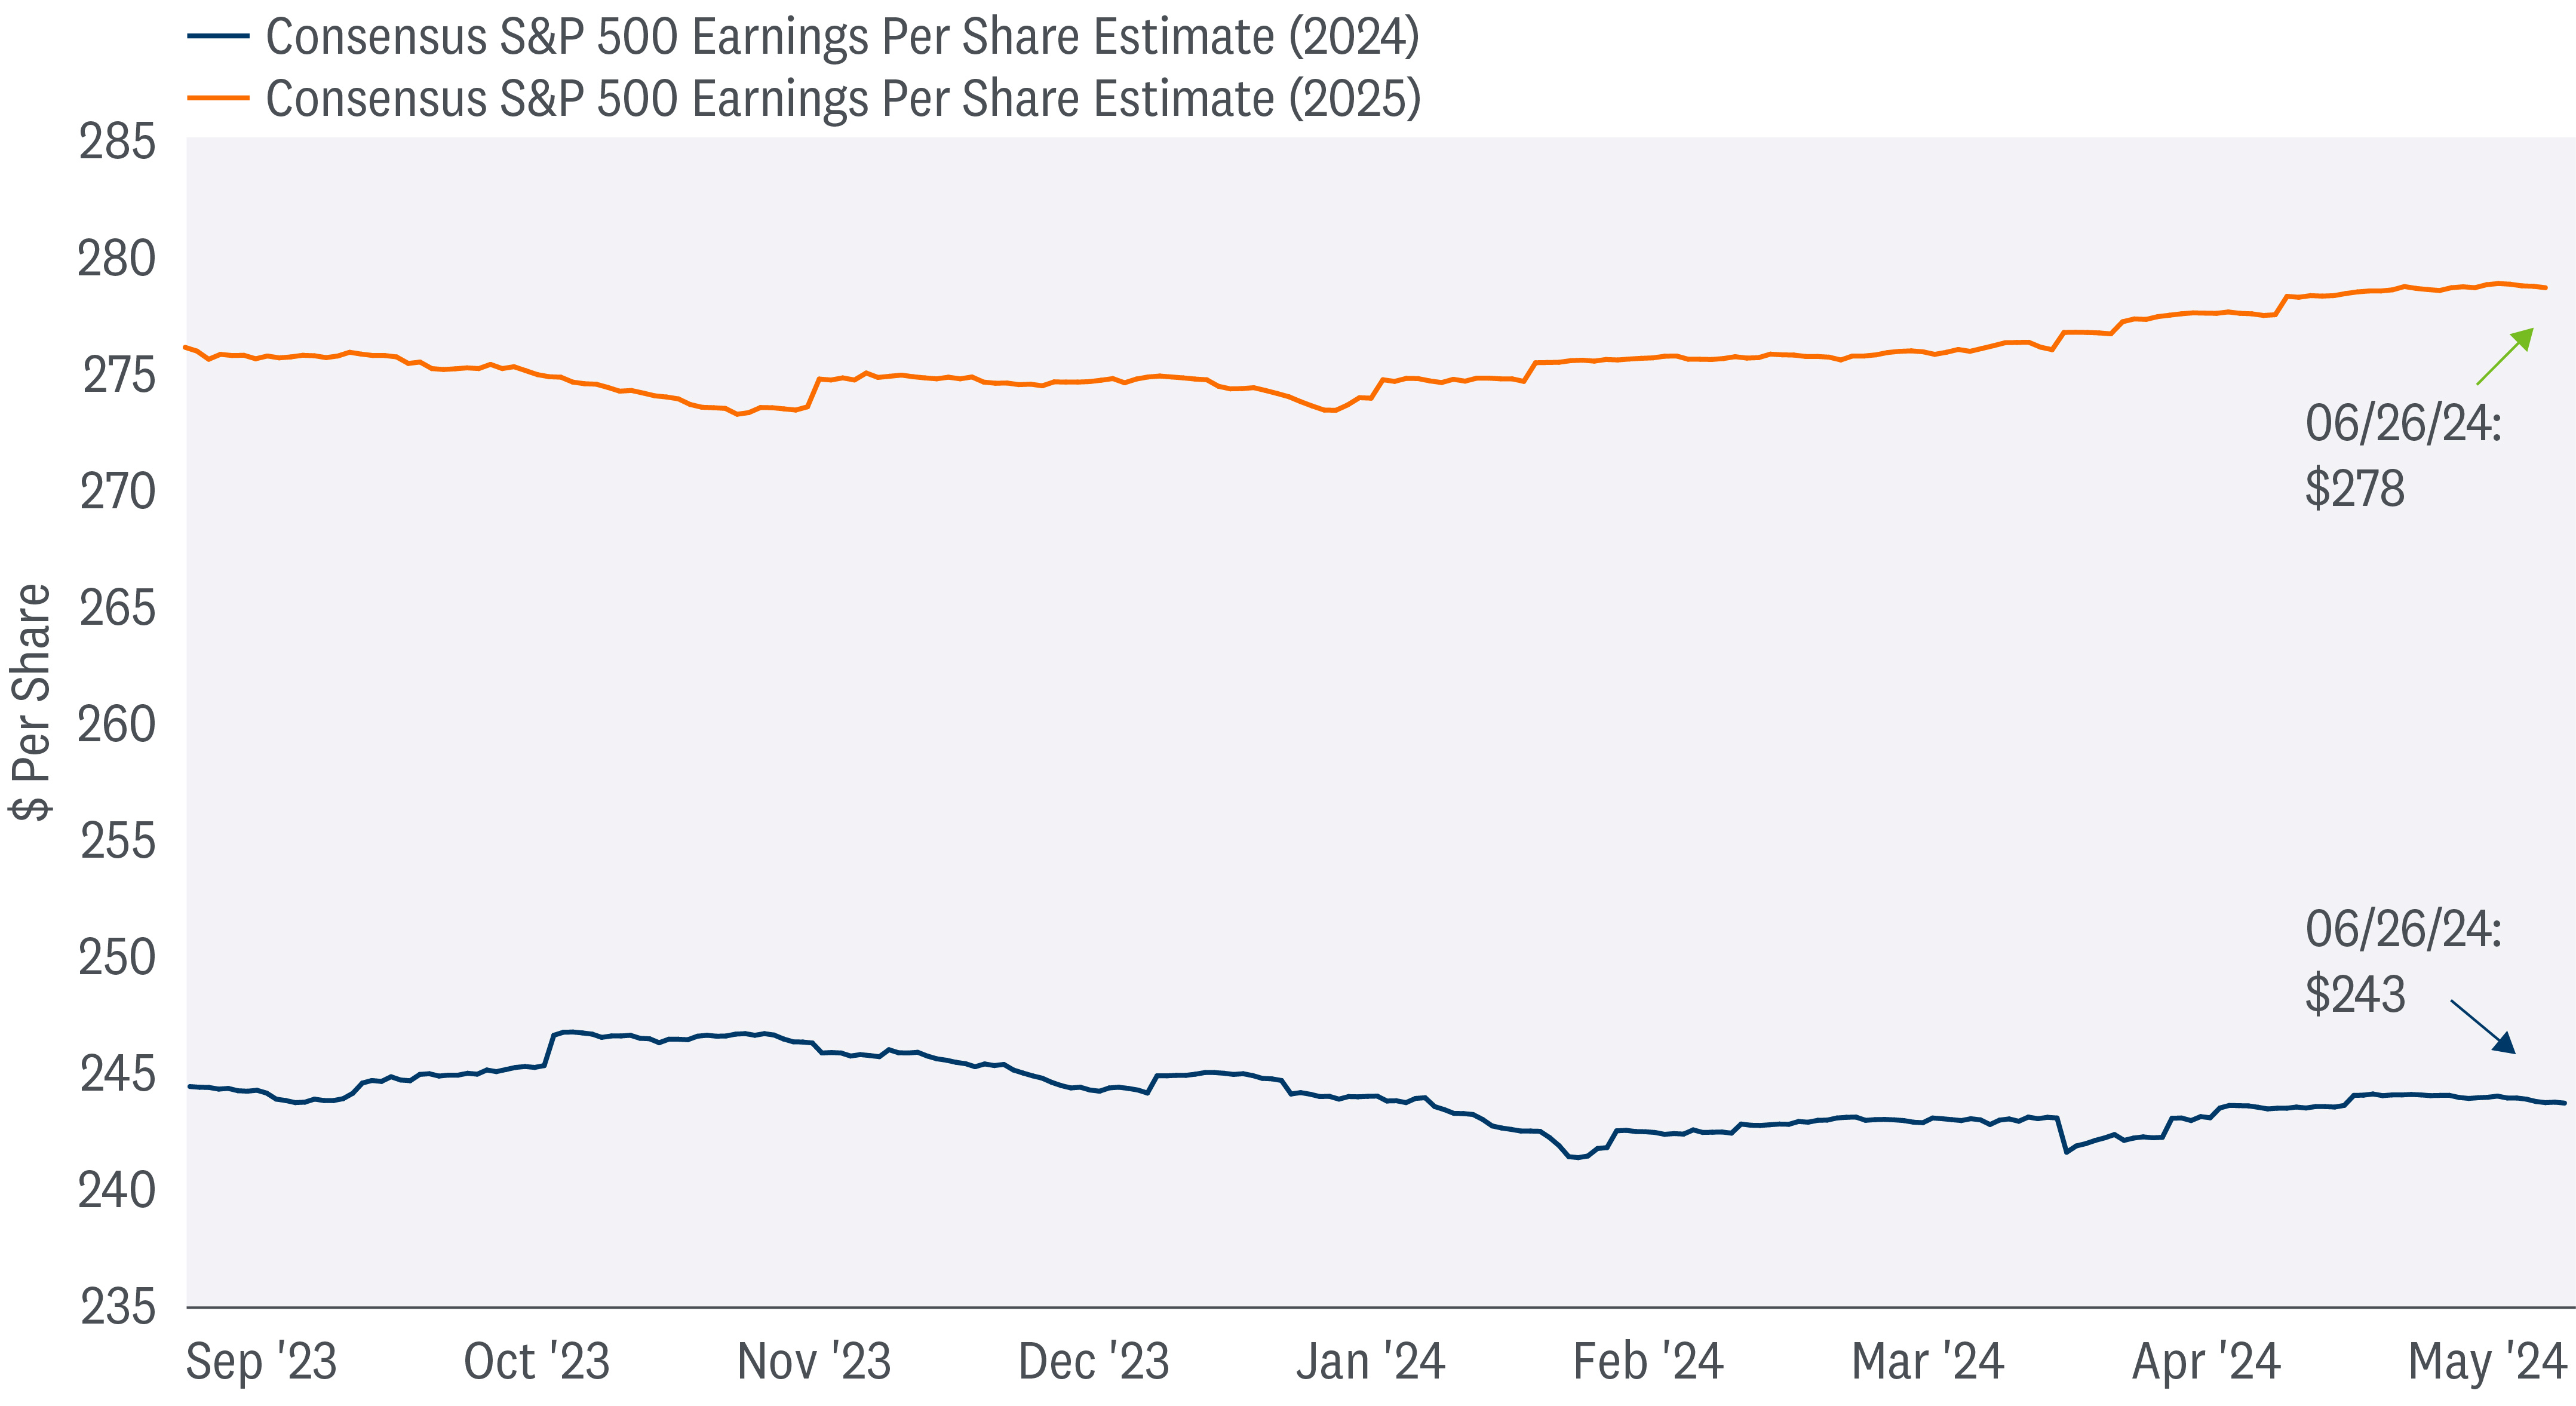 The chart depicts the consensus S&P 500 earnings per share estimates for 2024 and 2025. The estimates are plotted over time, from September 2023 to May 2024. The blue line represents the consensus estimate for 2024, and the orange line represents the consensus estimate for 2025. The chart depicts that the consensus estimate for 2025 is generally higher than the consensus estimate for 2024. In addition, the chart depicts that the 2025 estimate has been trending upwards, while the 2024 estimate has been trending downwards.